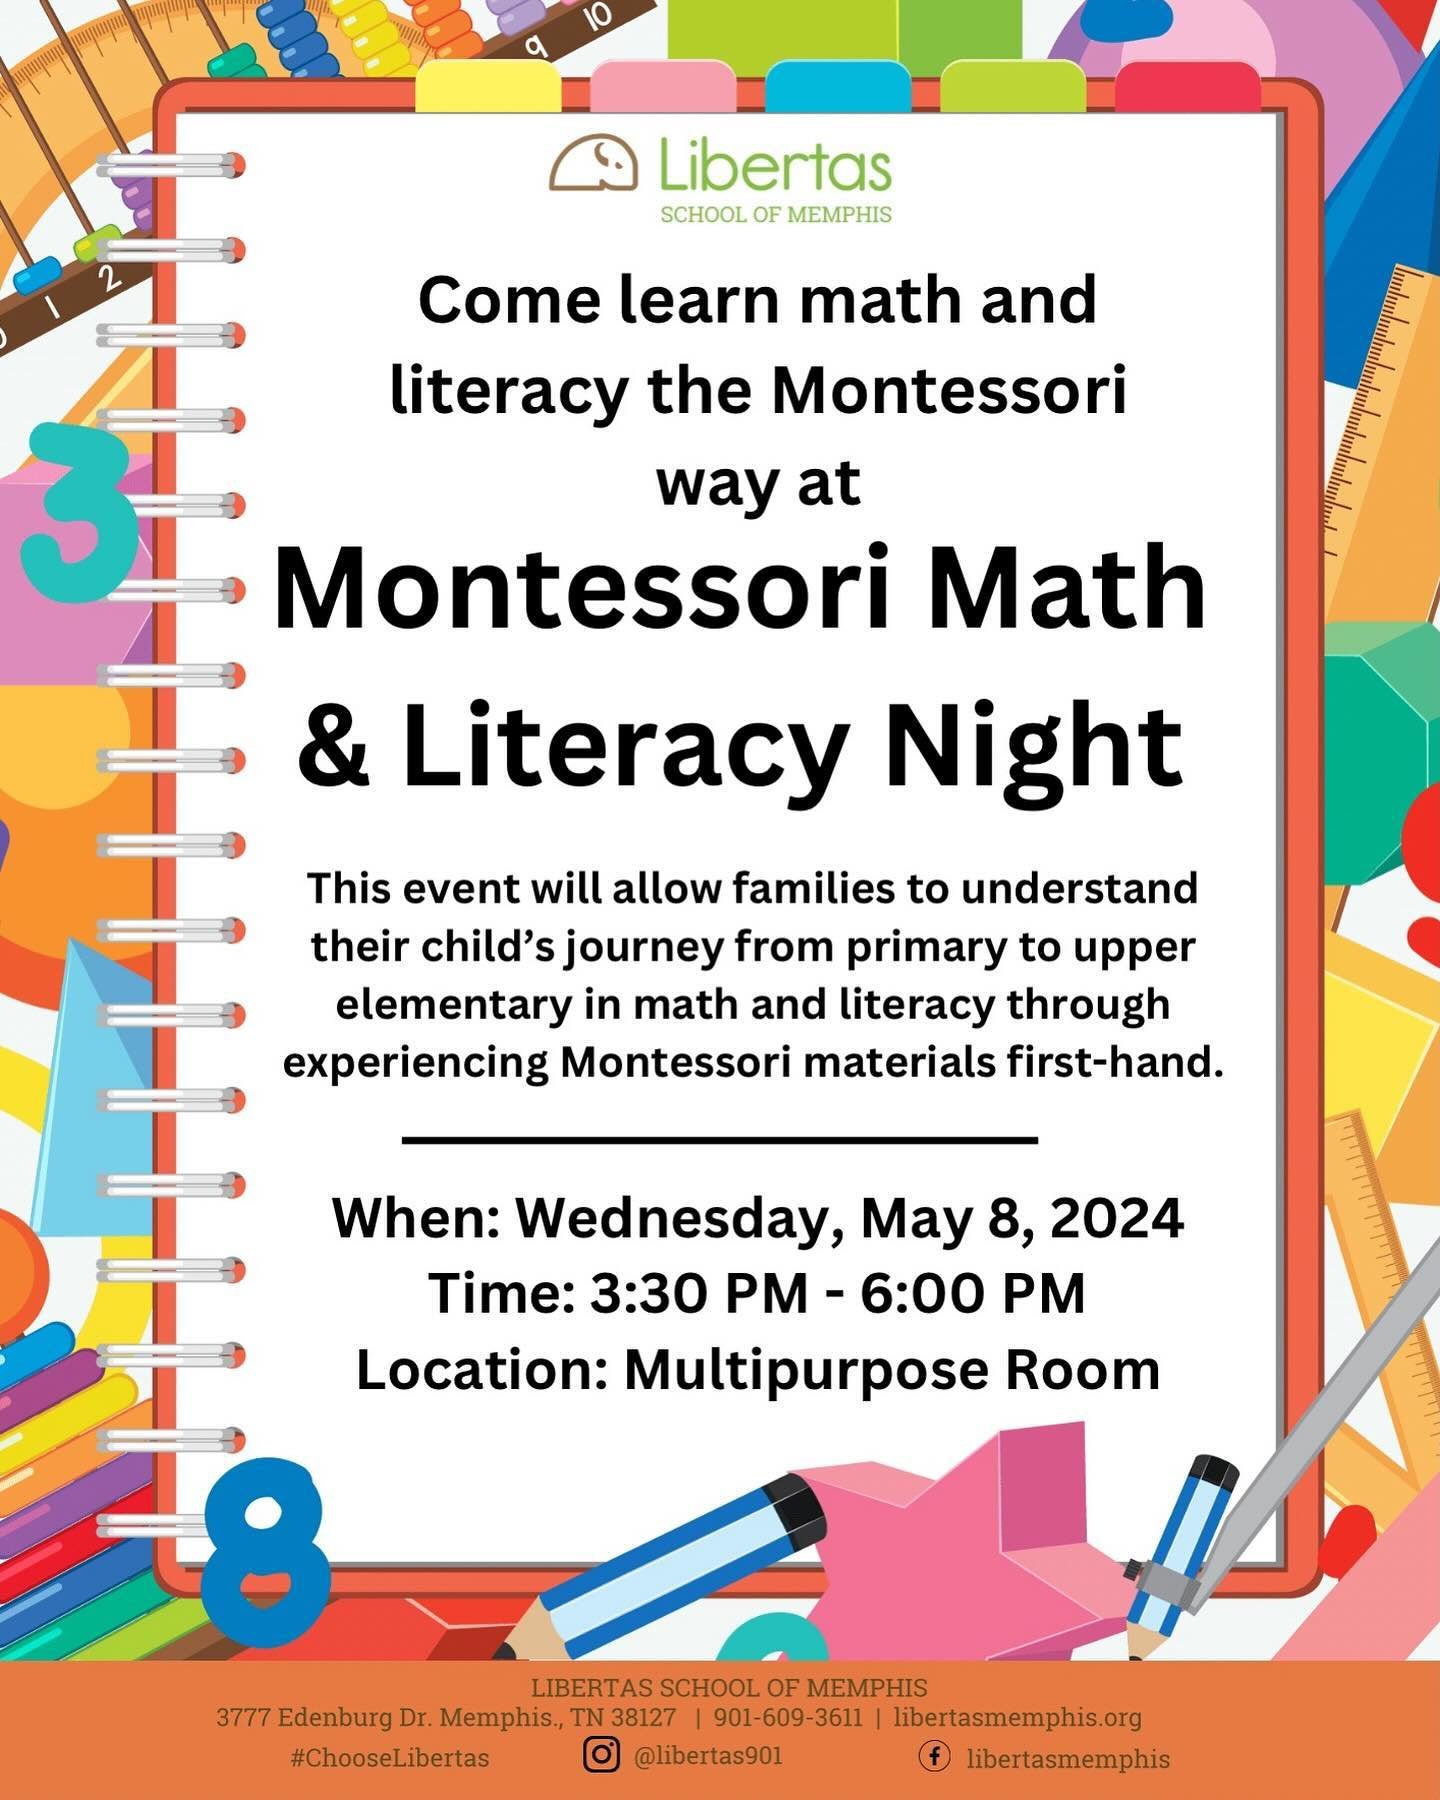 Join us May 8th for our annual &ldquo;Math &amp; Montessori Night.&rdquo; Families will get to experience how to learn math &amp; literature the Montessori way. #ChooseLibertas